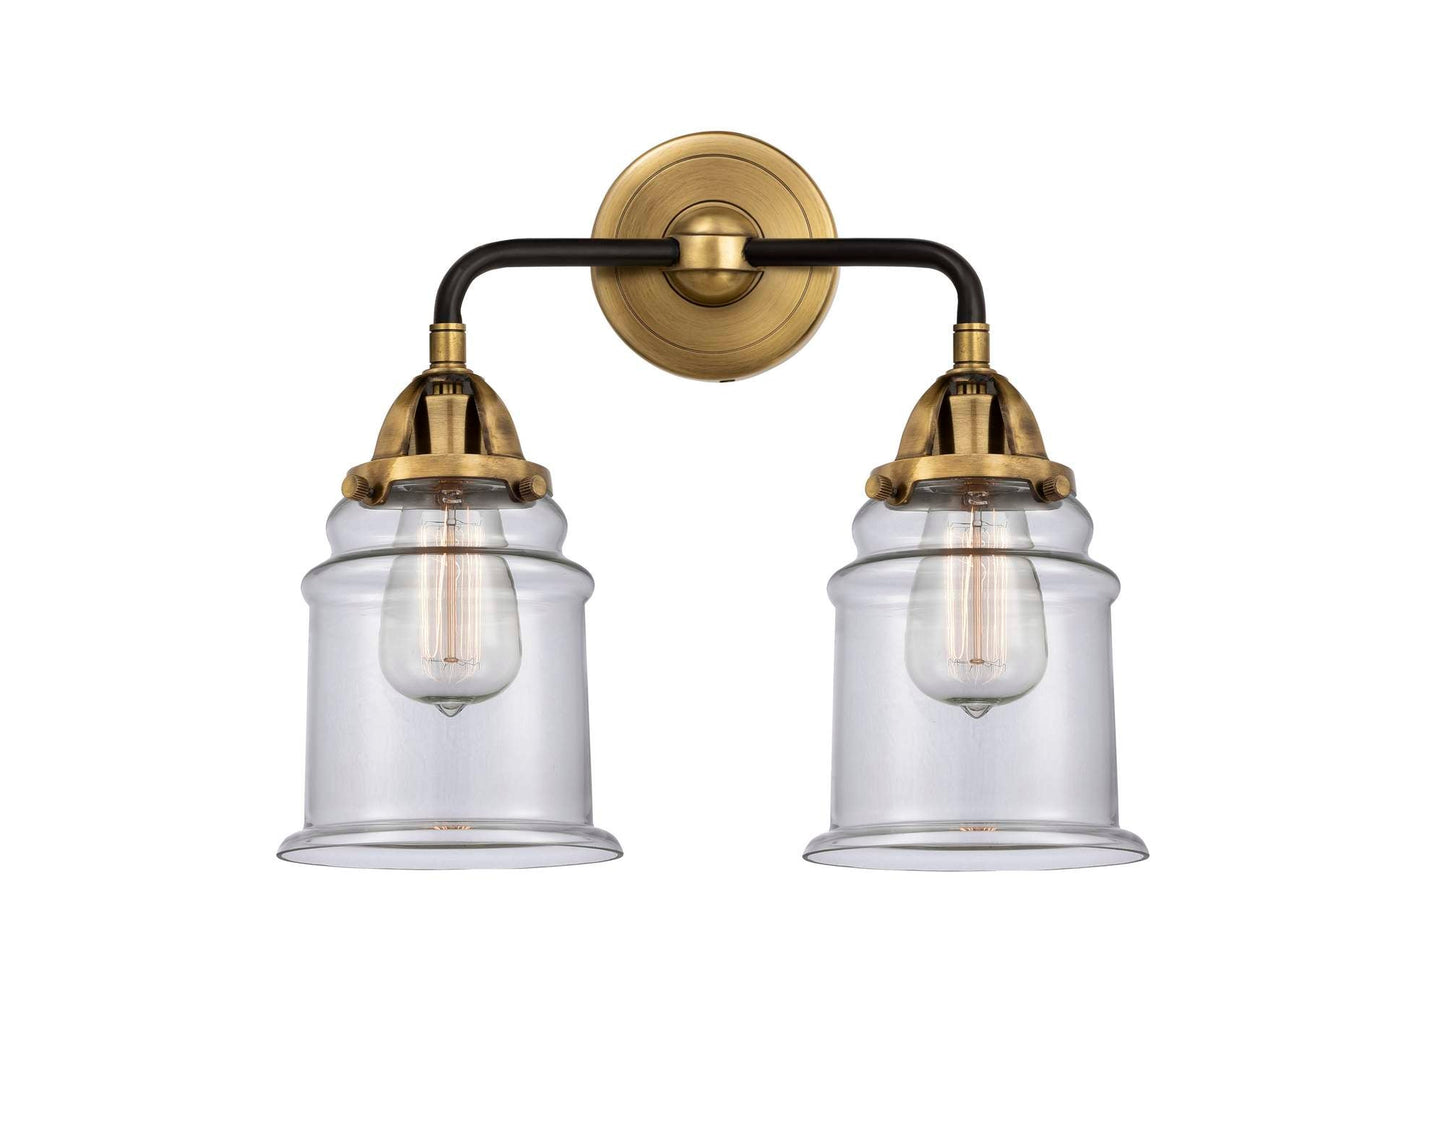 288-2W-BAB-G182 2-Light 14" Black Antique Brass Bath Vanity Light - Clear Canton Glass - LED Bulb - Dimmensions: 14 x 7.25 x 13.625 - Glass Up or Down: Yes